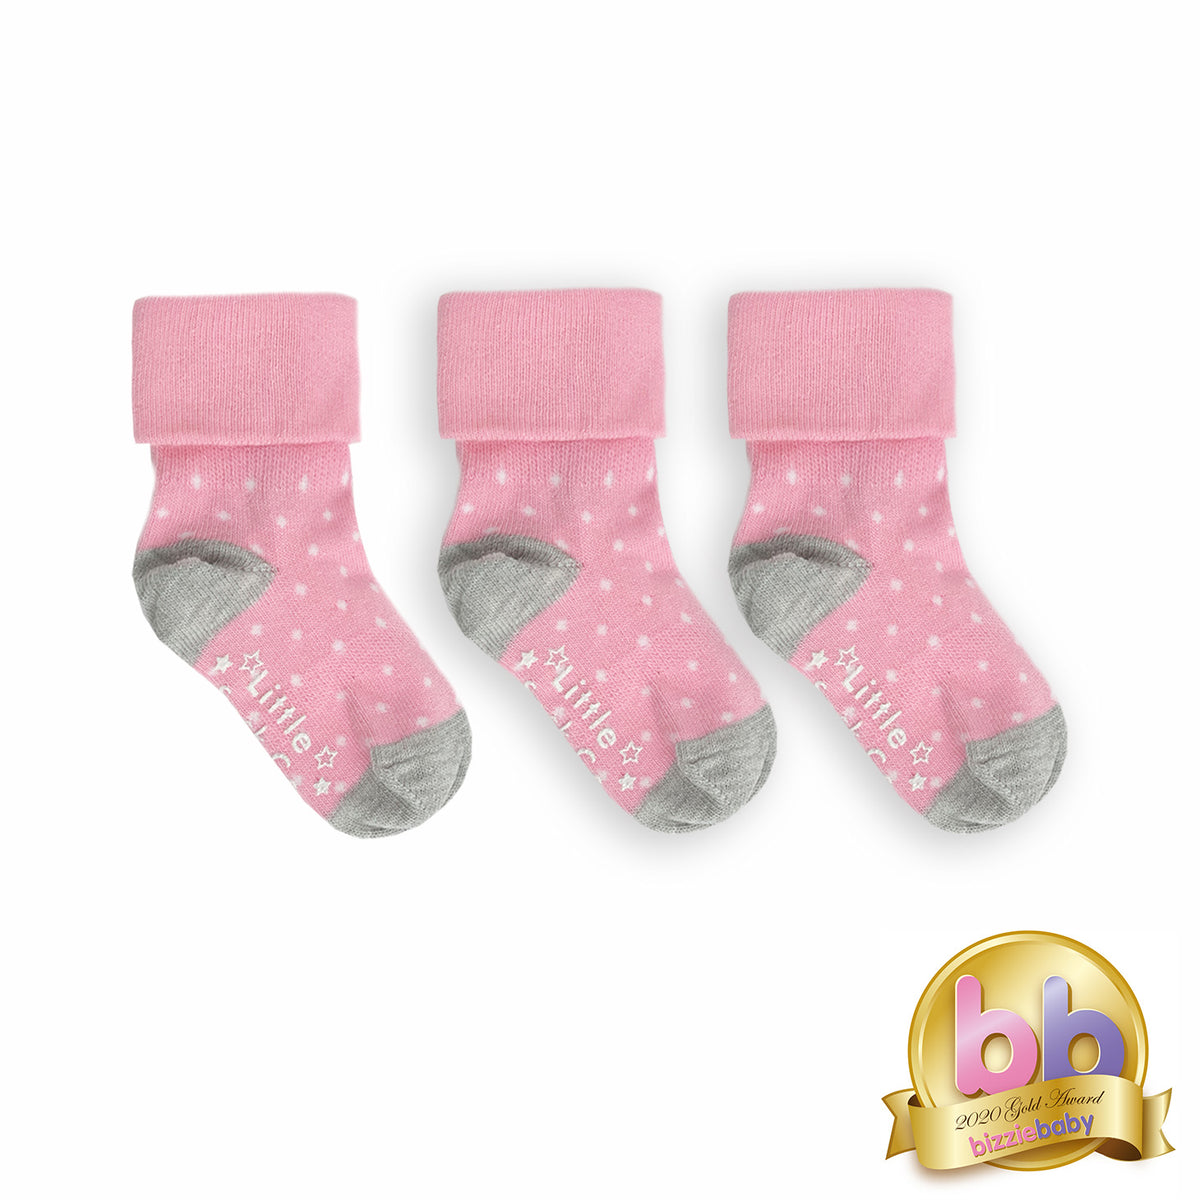 Non-Slip Stay On Baby and Toddler Socks - 3 Pack in Candy Pin dot